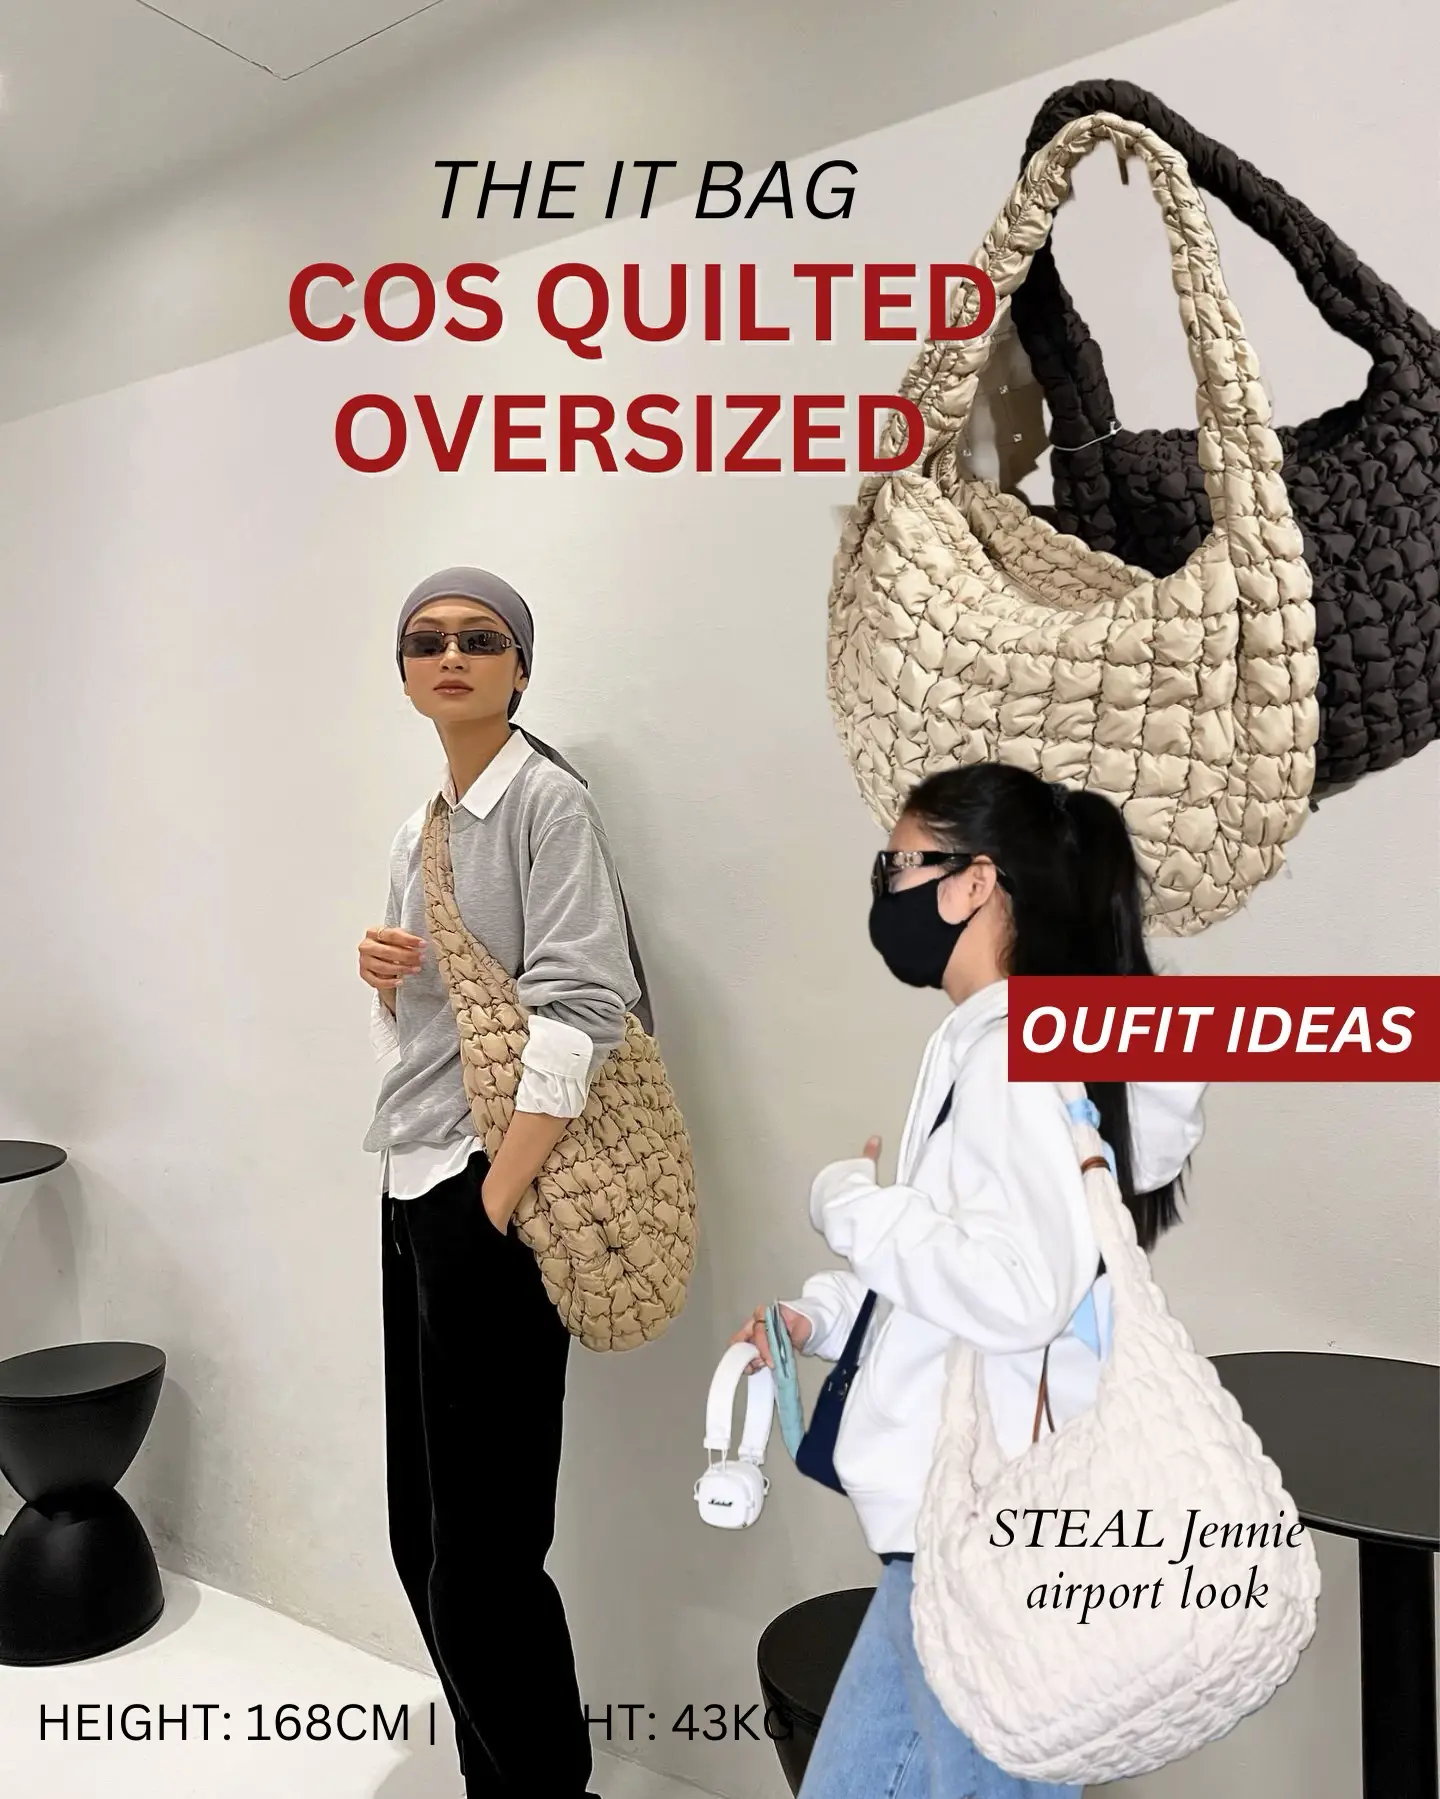 What To Wear The It Bag, COS Quilted Bag